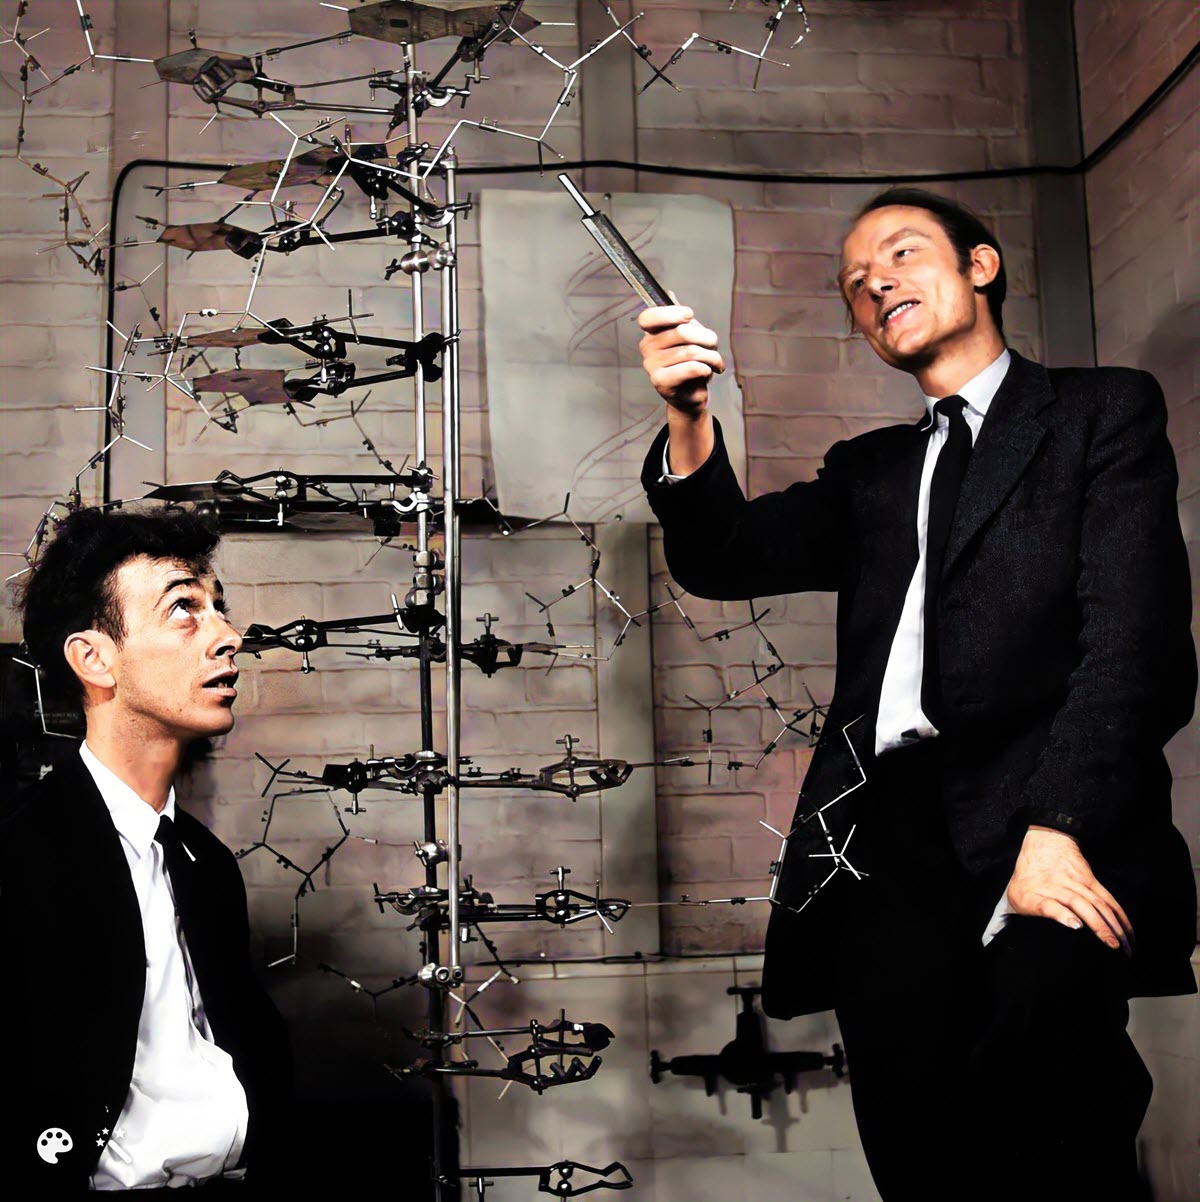 On April 25, 1953, James Watson and Francis Crick formally announced their discovery of deoxyribonucleic acid (DNA) in a short letter published in the science journal, Nature. 